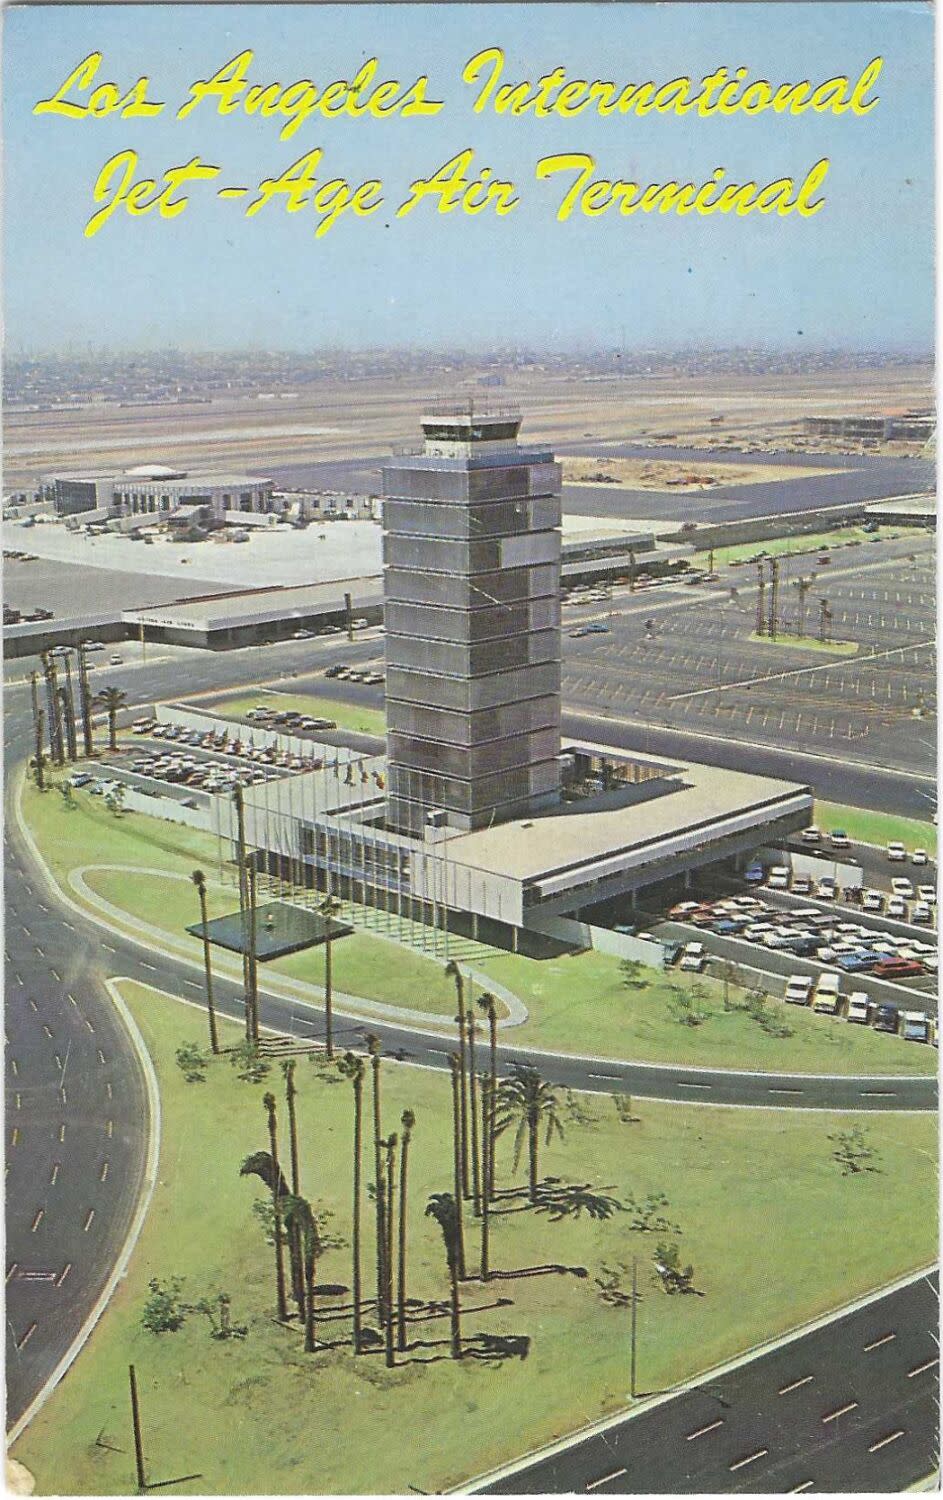 Overhead view of 1963 LAX. Text reads: &quot;Los Angeles International Jet-Age Air Terminal&quot;